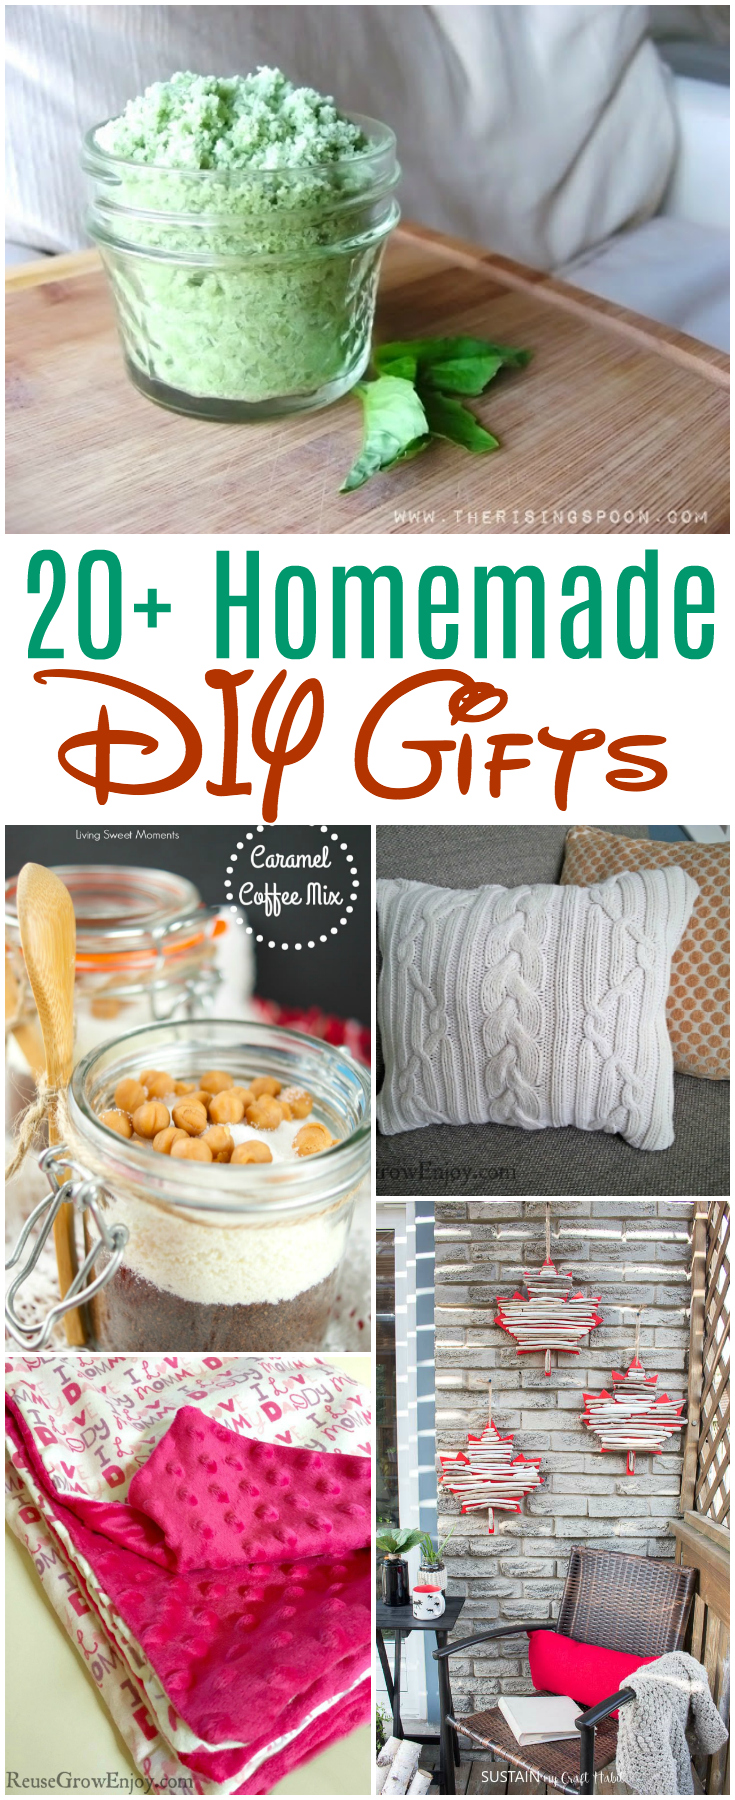 Over 20 Homemade Gifts to DIY for family and friends to celebrate Thanksgiving, Christmas, Birthdays, Mother's or even Father's Day.